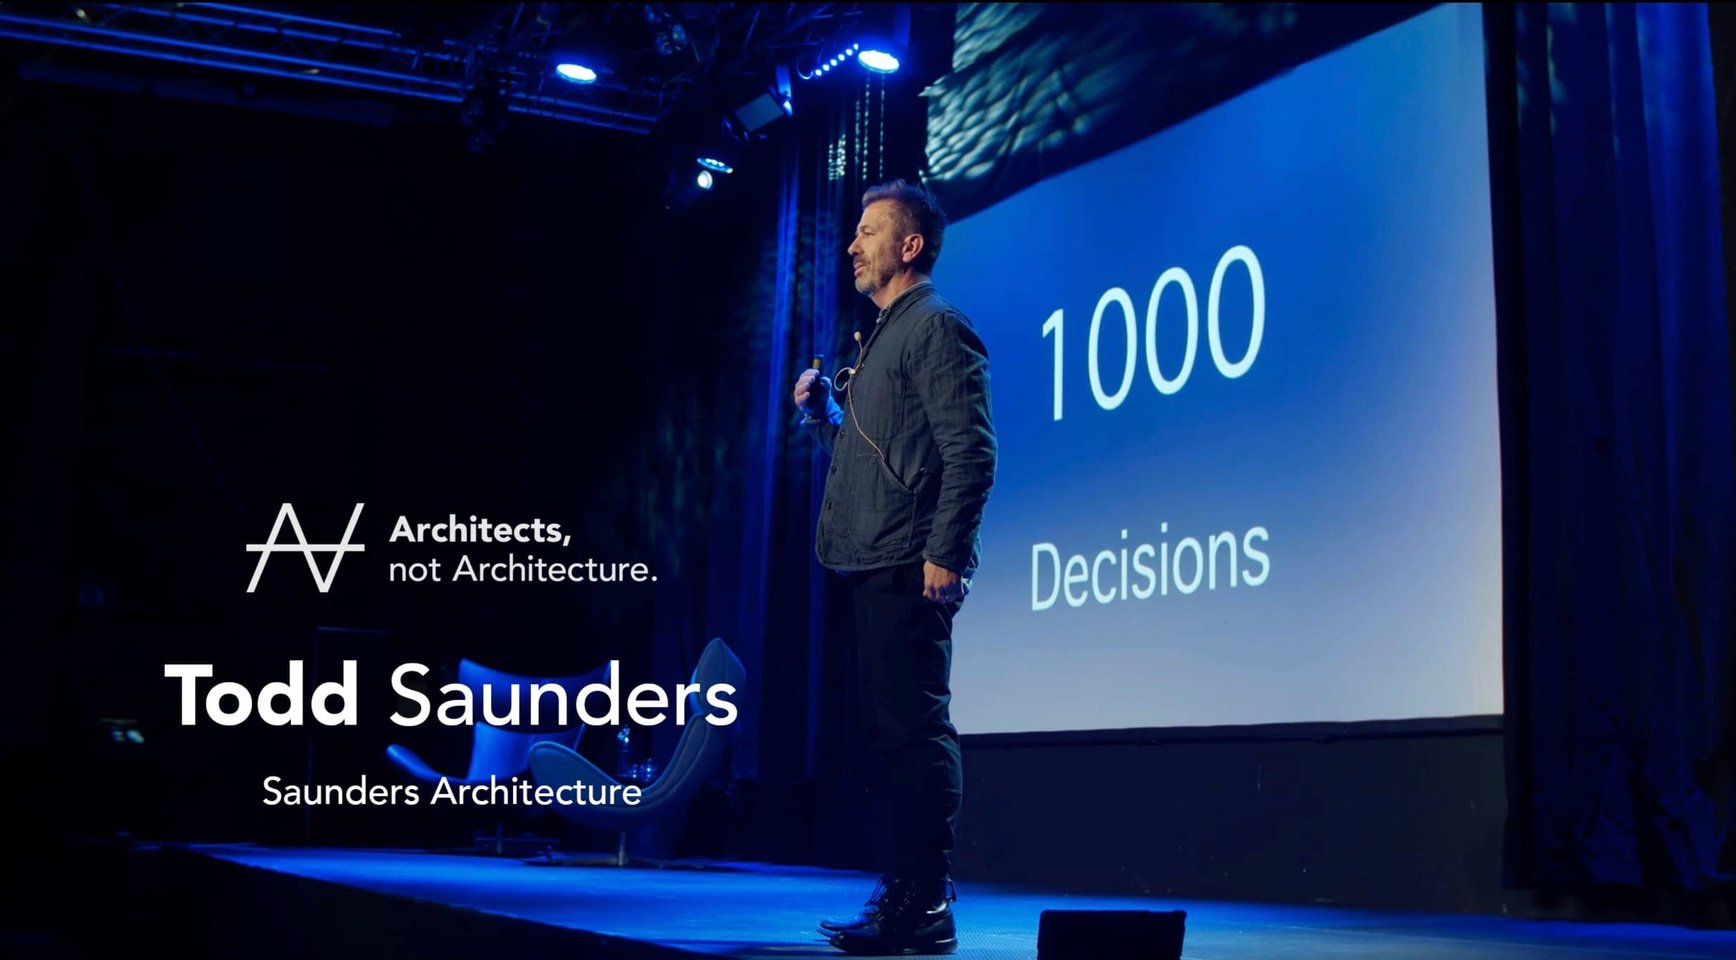 Architects, not Architecture video med Todd Saunders